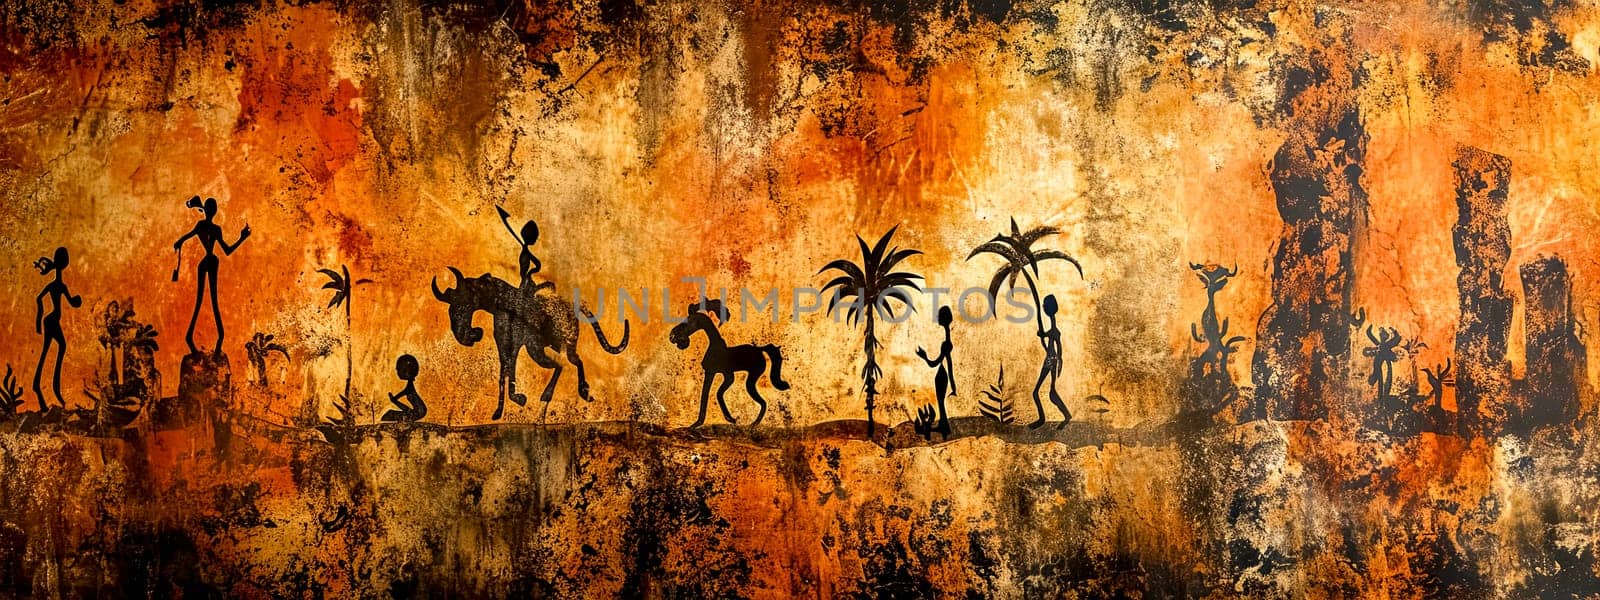 Ancient tribal art style mural with human and animal figures.